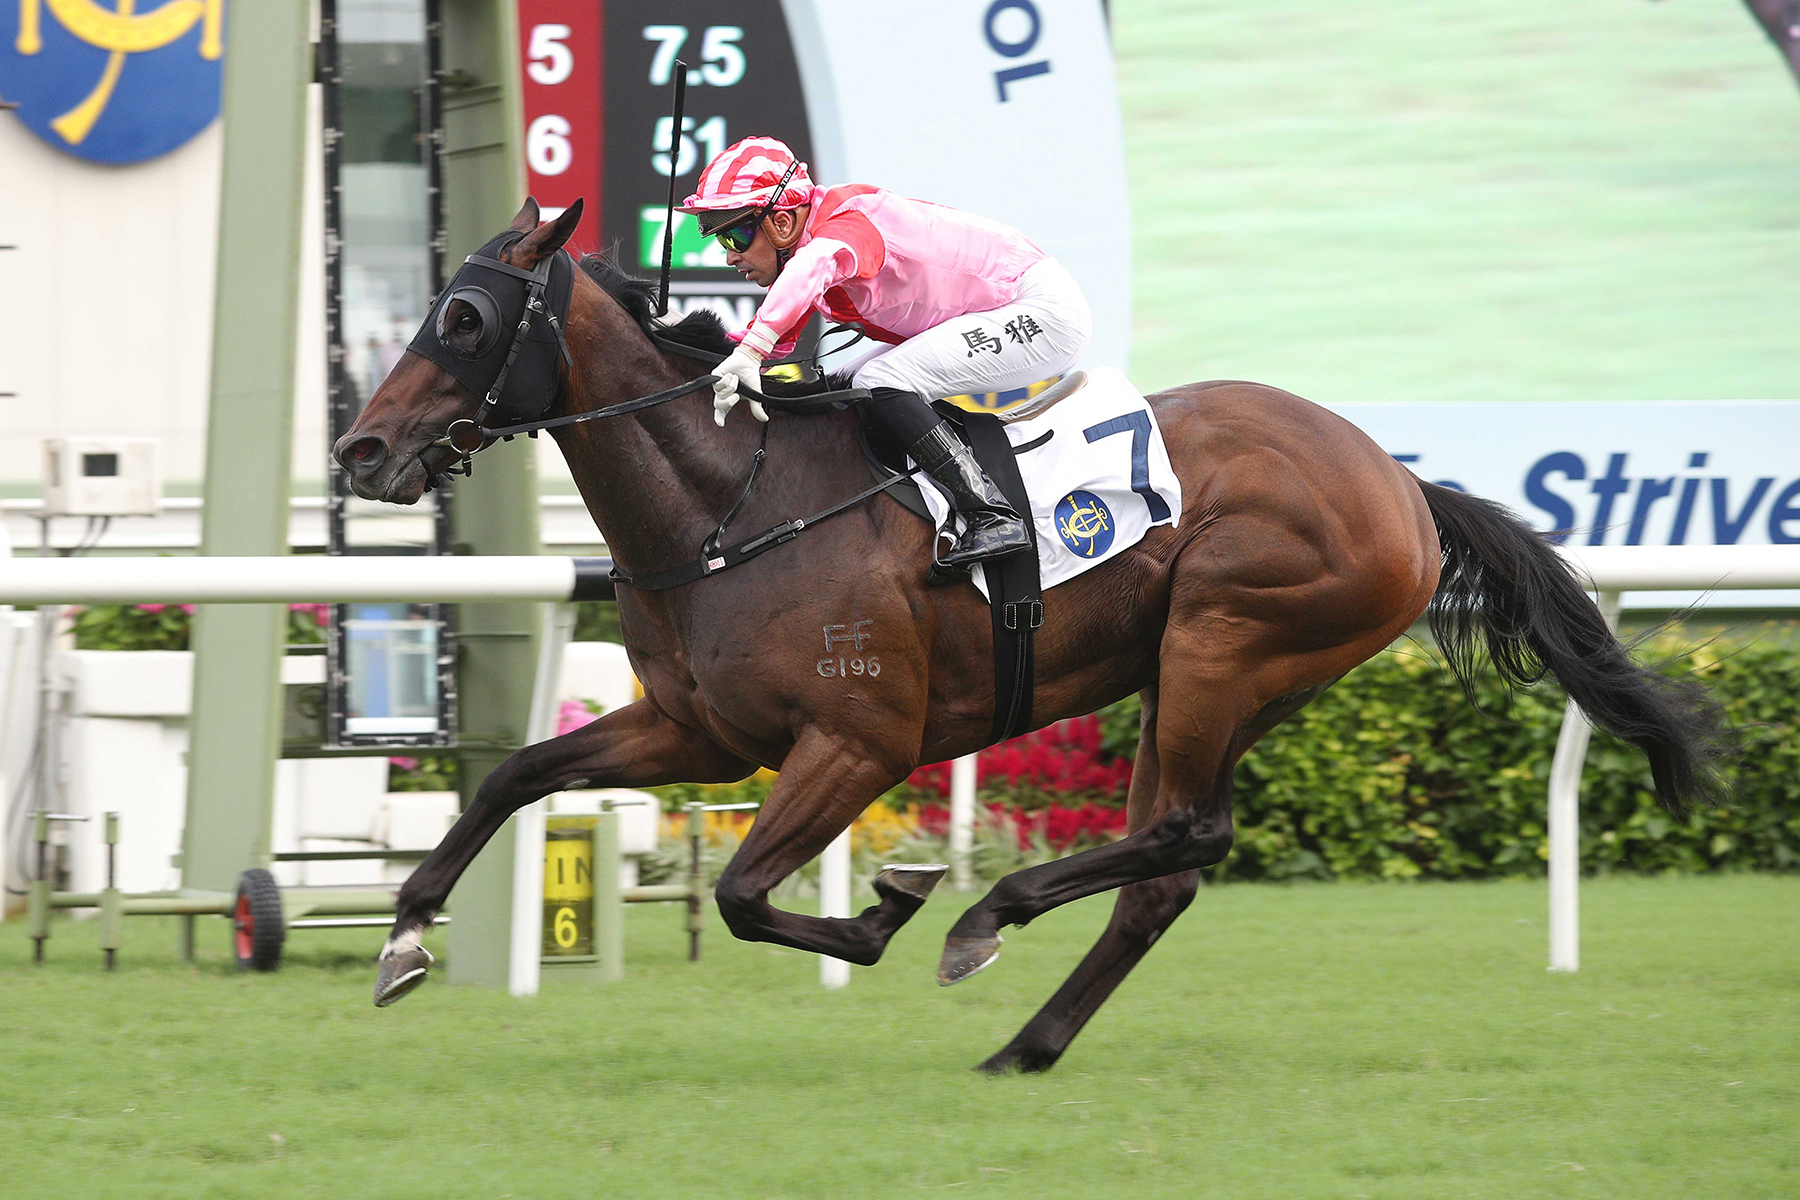 The Douglas Whyte-trained Ace One takes the Class 3 Apprentice Jockeys’ School 50th Anniversary Cup Handicap (1200m) under Ruan Maia at Sha Tin Racecourse today (Sunday, 5 June).